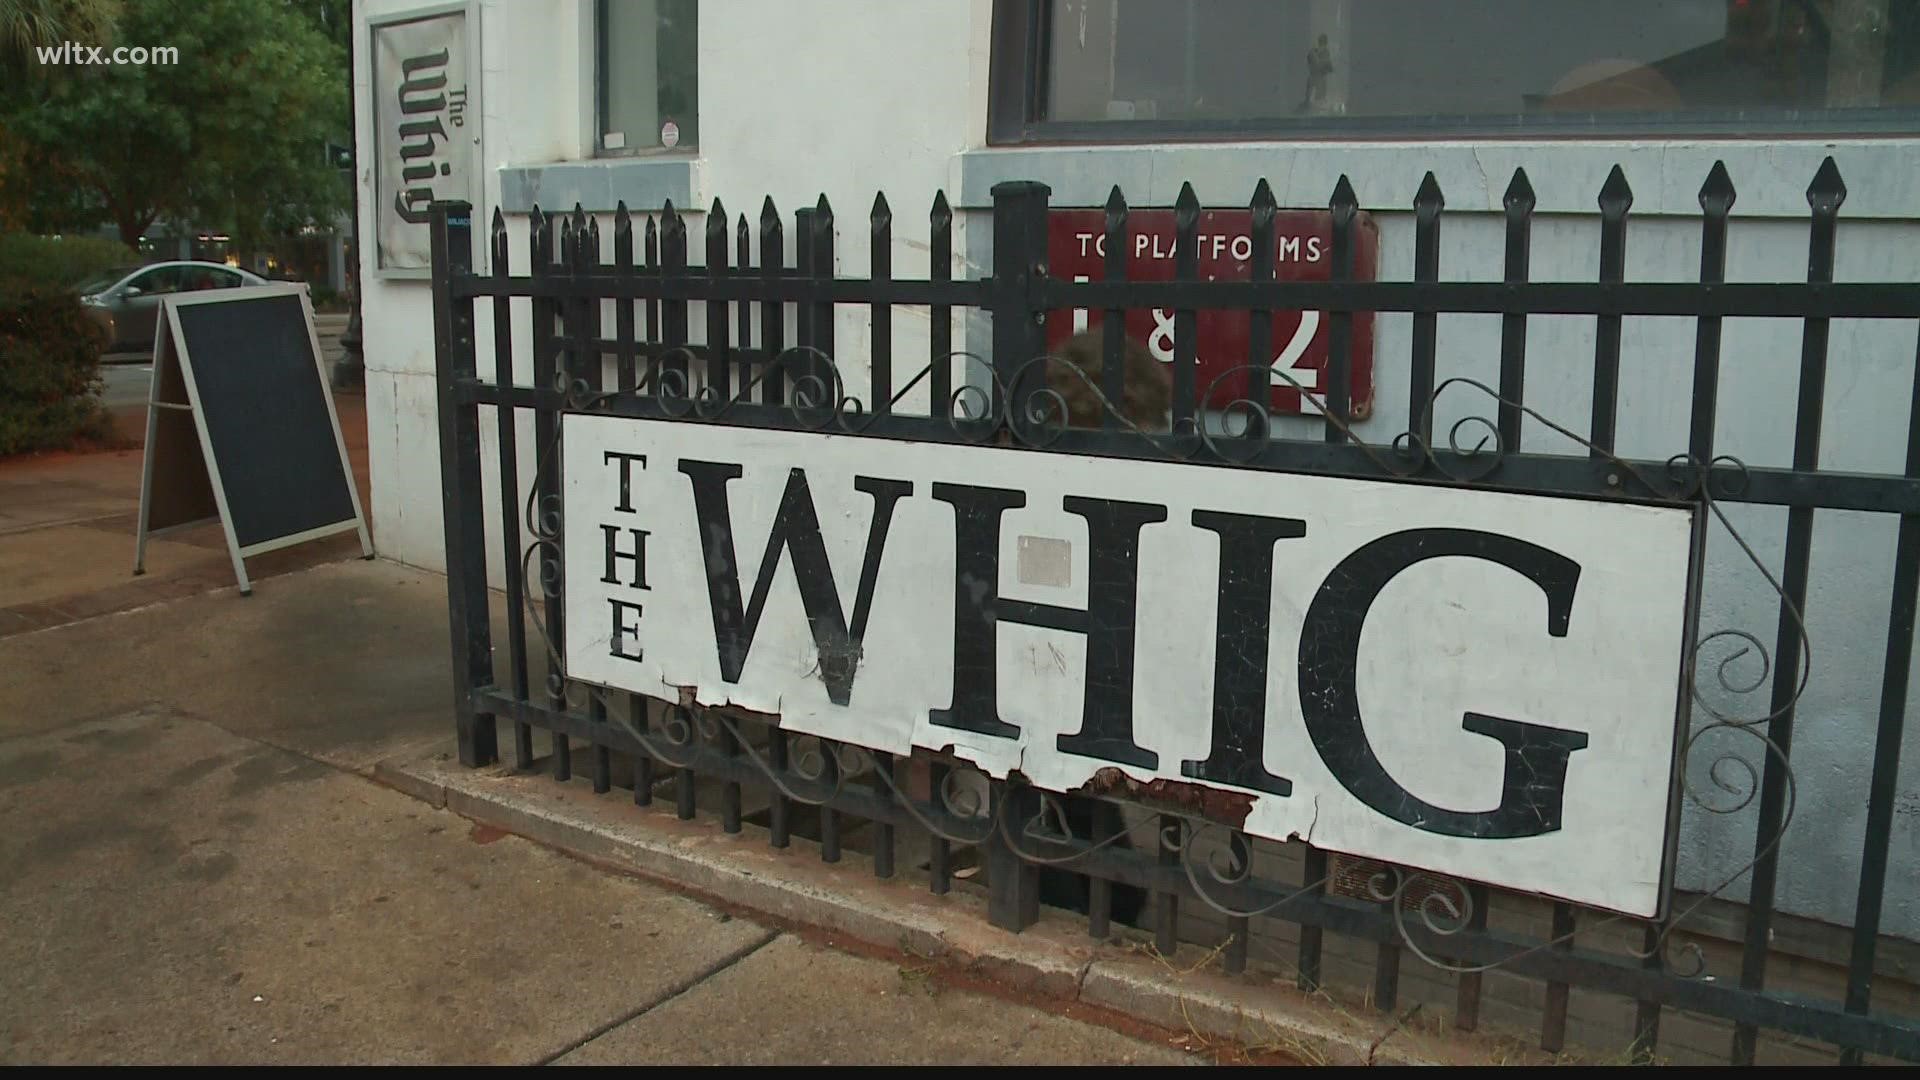 One of Main Street Columbia's iconic spaces, The Whig on Main Street, has announced it will be closing sometime by the end of 2022.